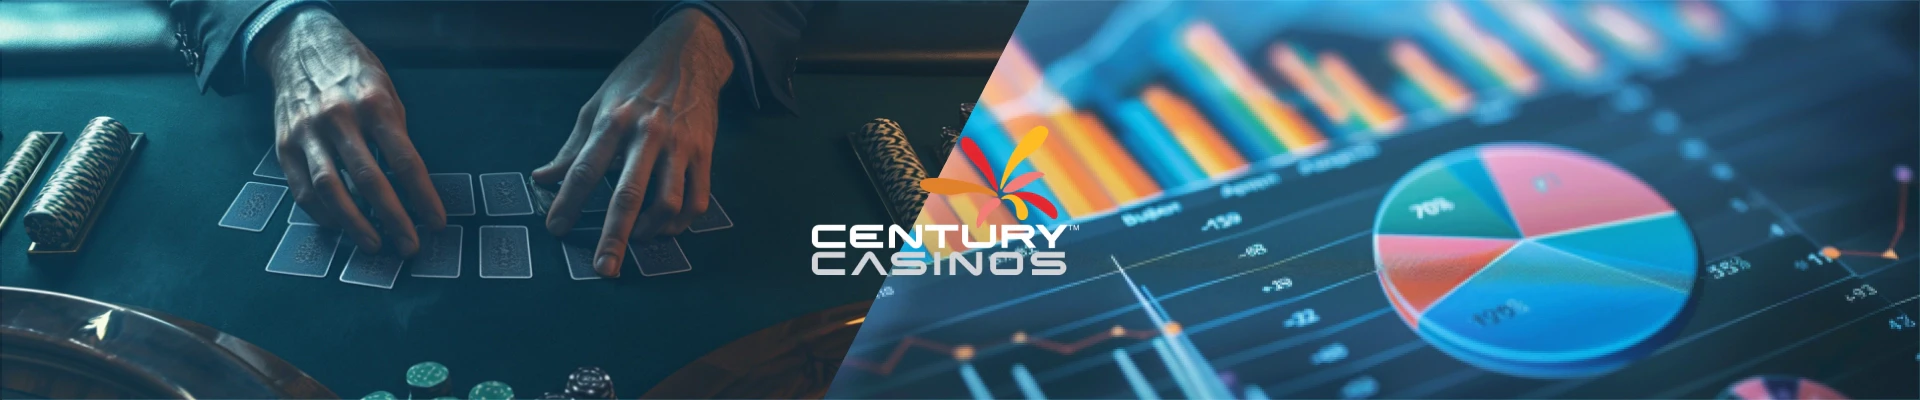 Century Casinos experiences net loss in 2023 due to rising costs